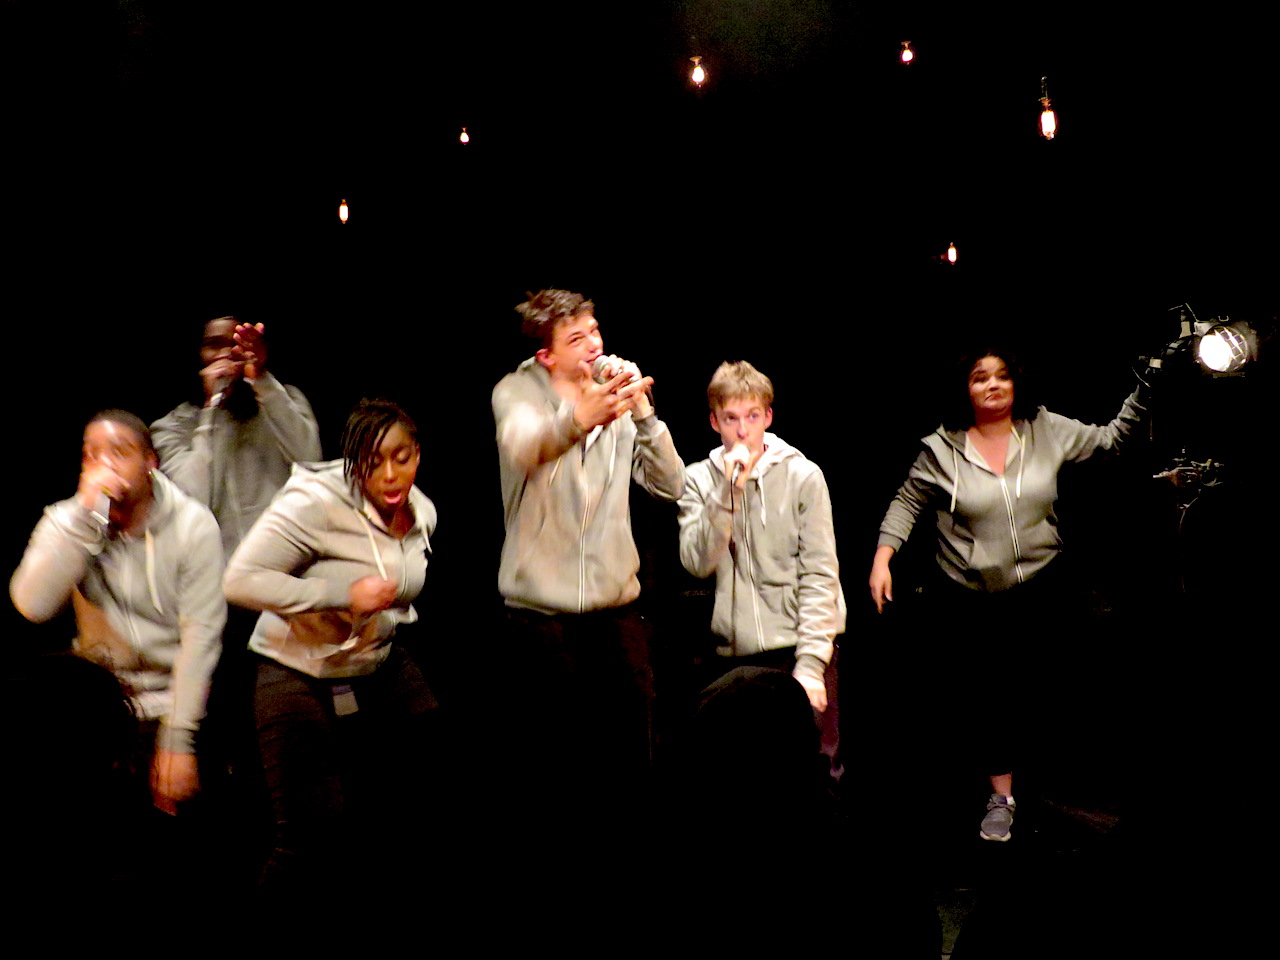 BAC Beatbox Academy performing their song 'Hideous' as part of their show 'Frankenstein' at Battersea Arts Centre on March 22, 2018 (Photo: Andy Worthington).